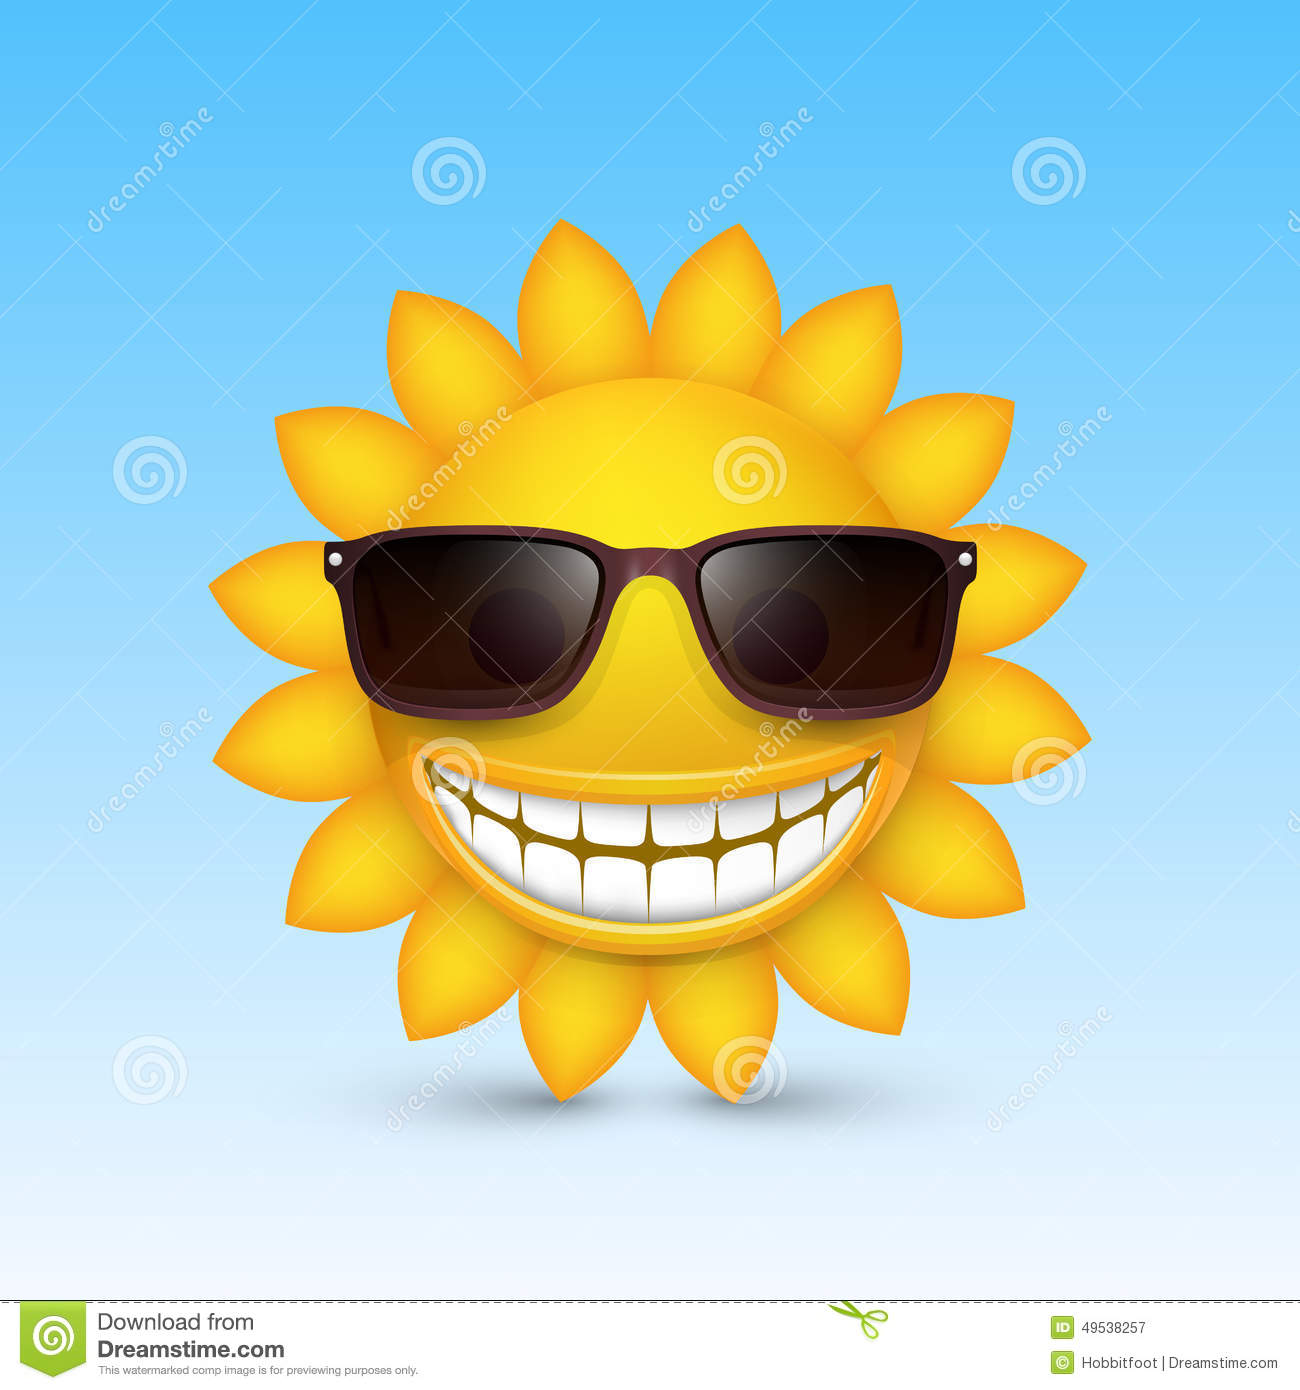 Smiley Sun with Sunglasses